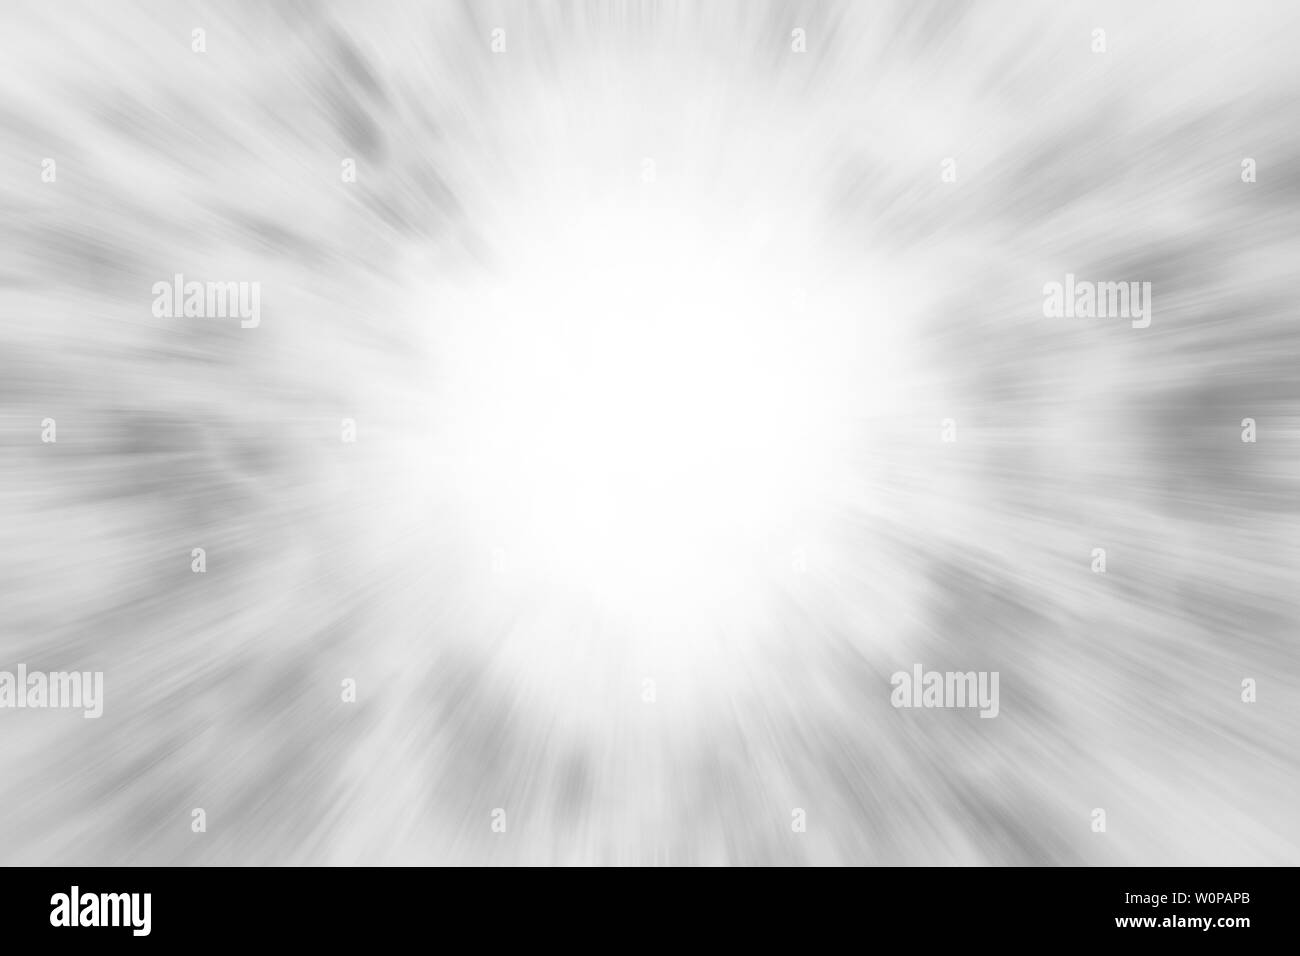 White rays of light background or vintage line texture abstract Stock Photo